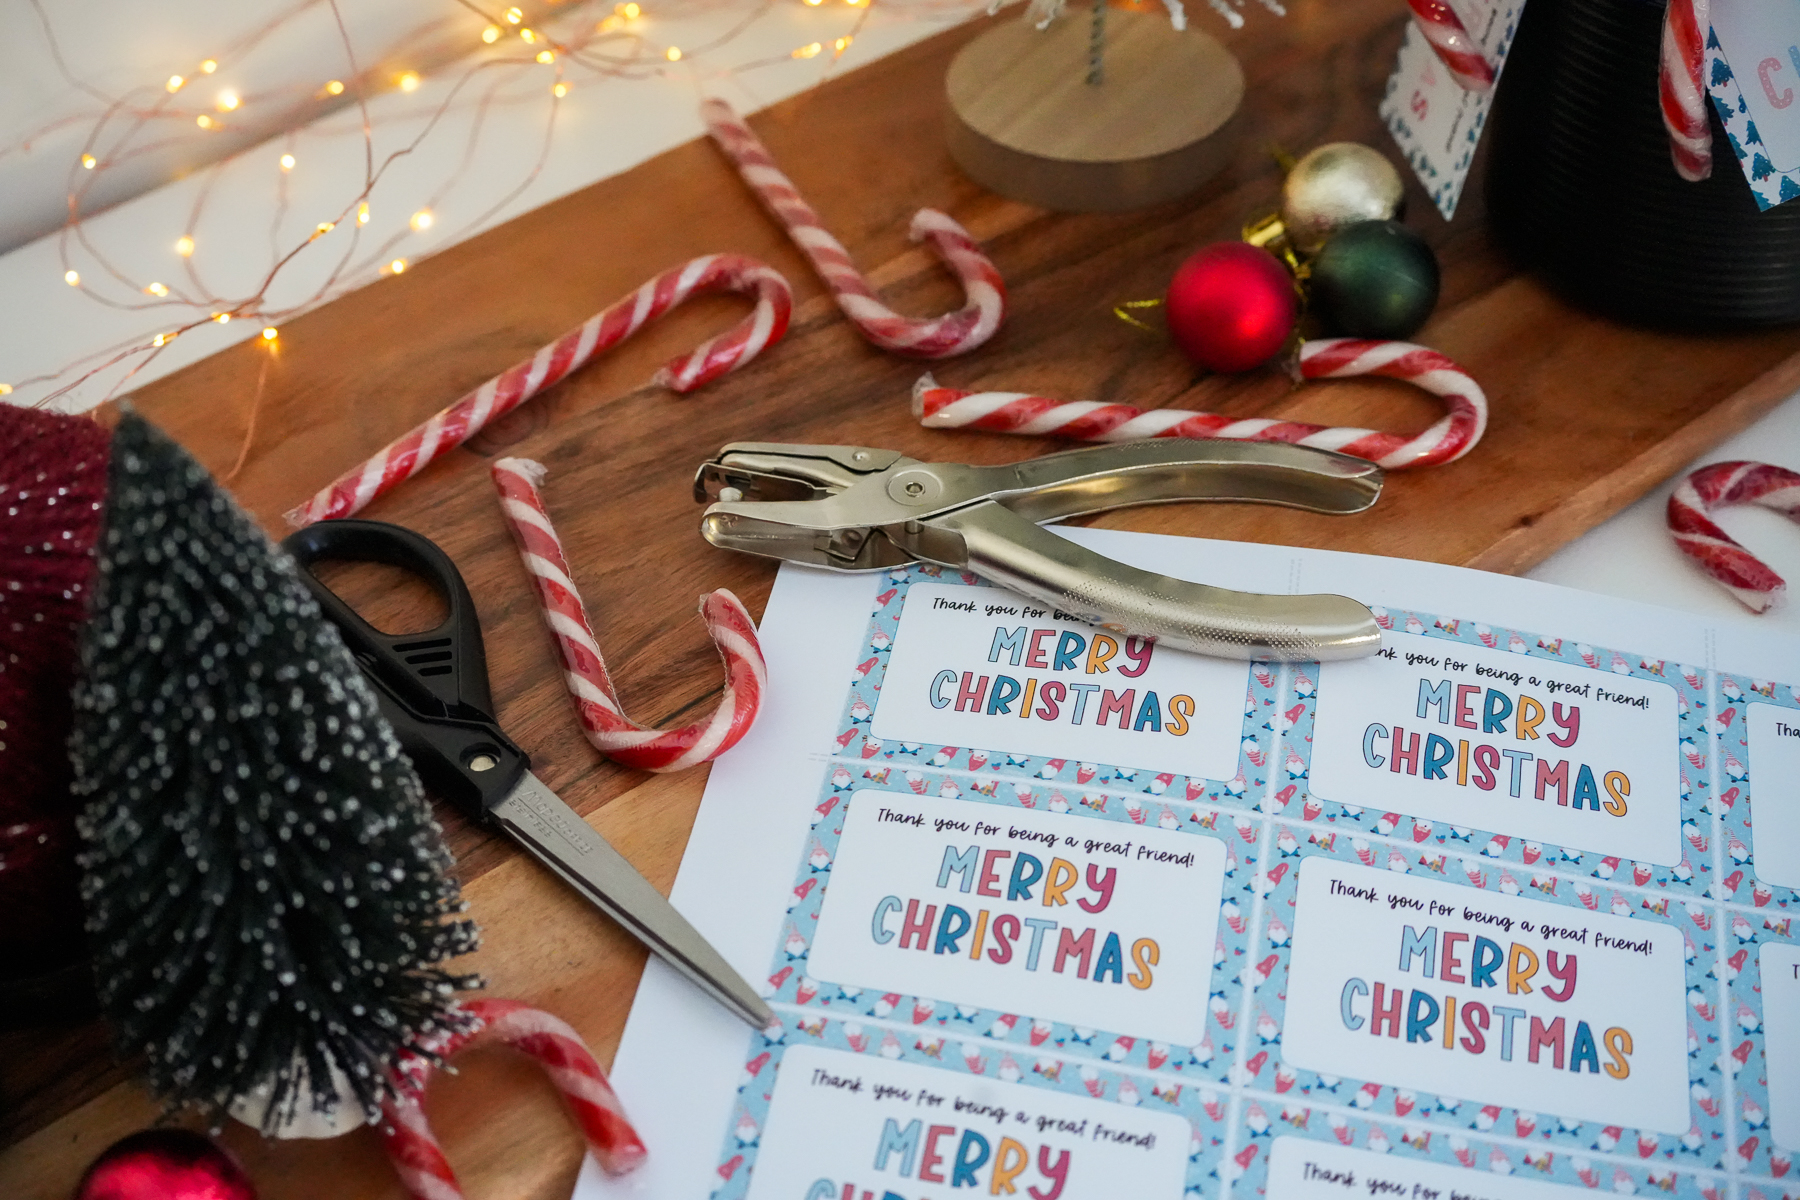 Spread holiday joy with our free Candy Cane Gift Tags Printable. A fun activity for kids and perfect for school friends.